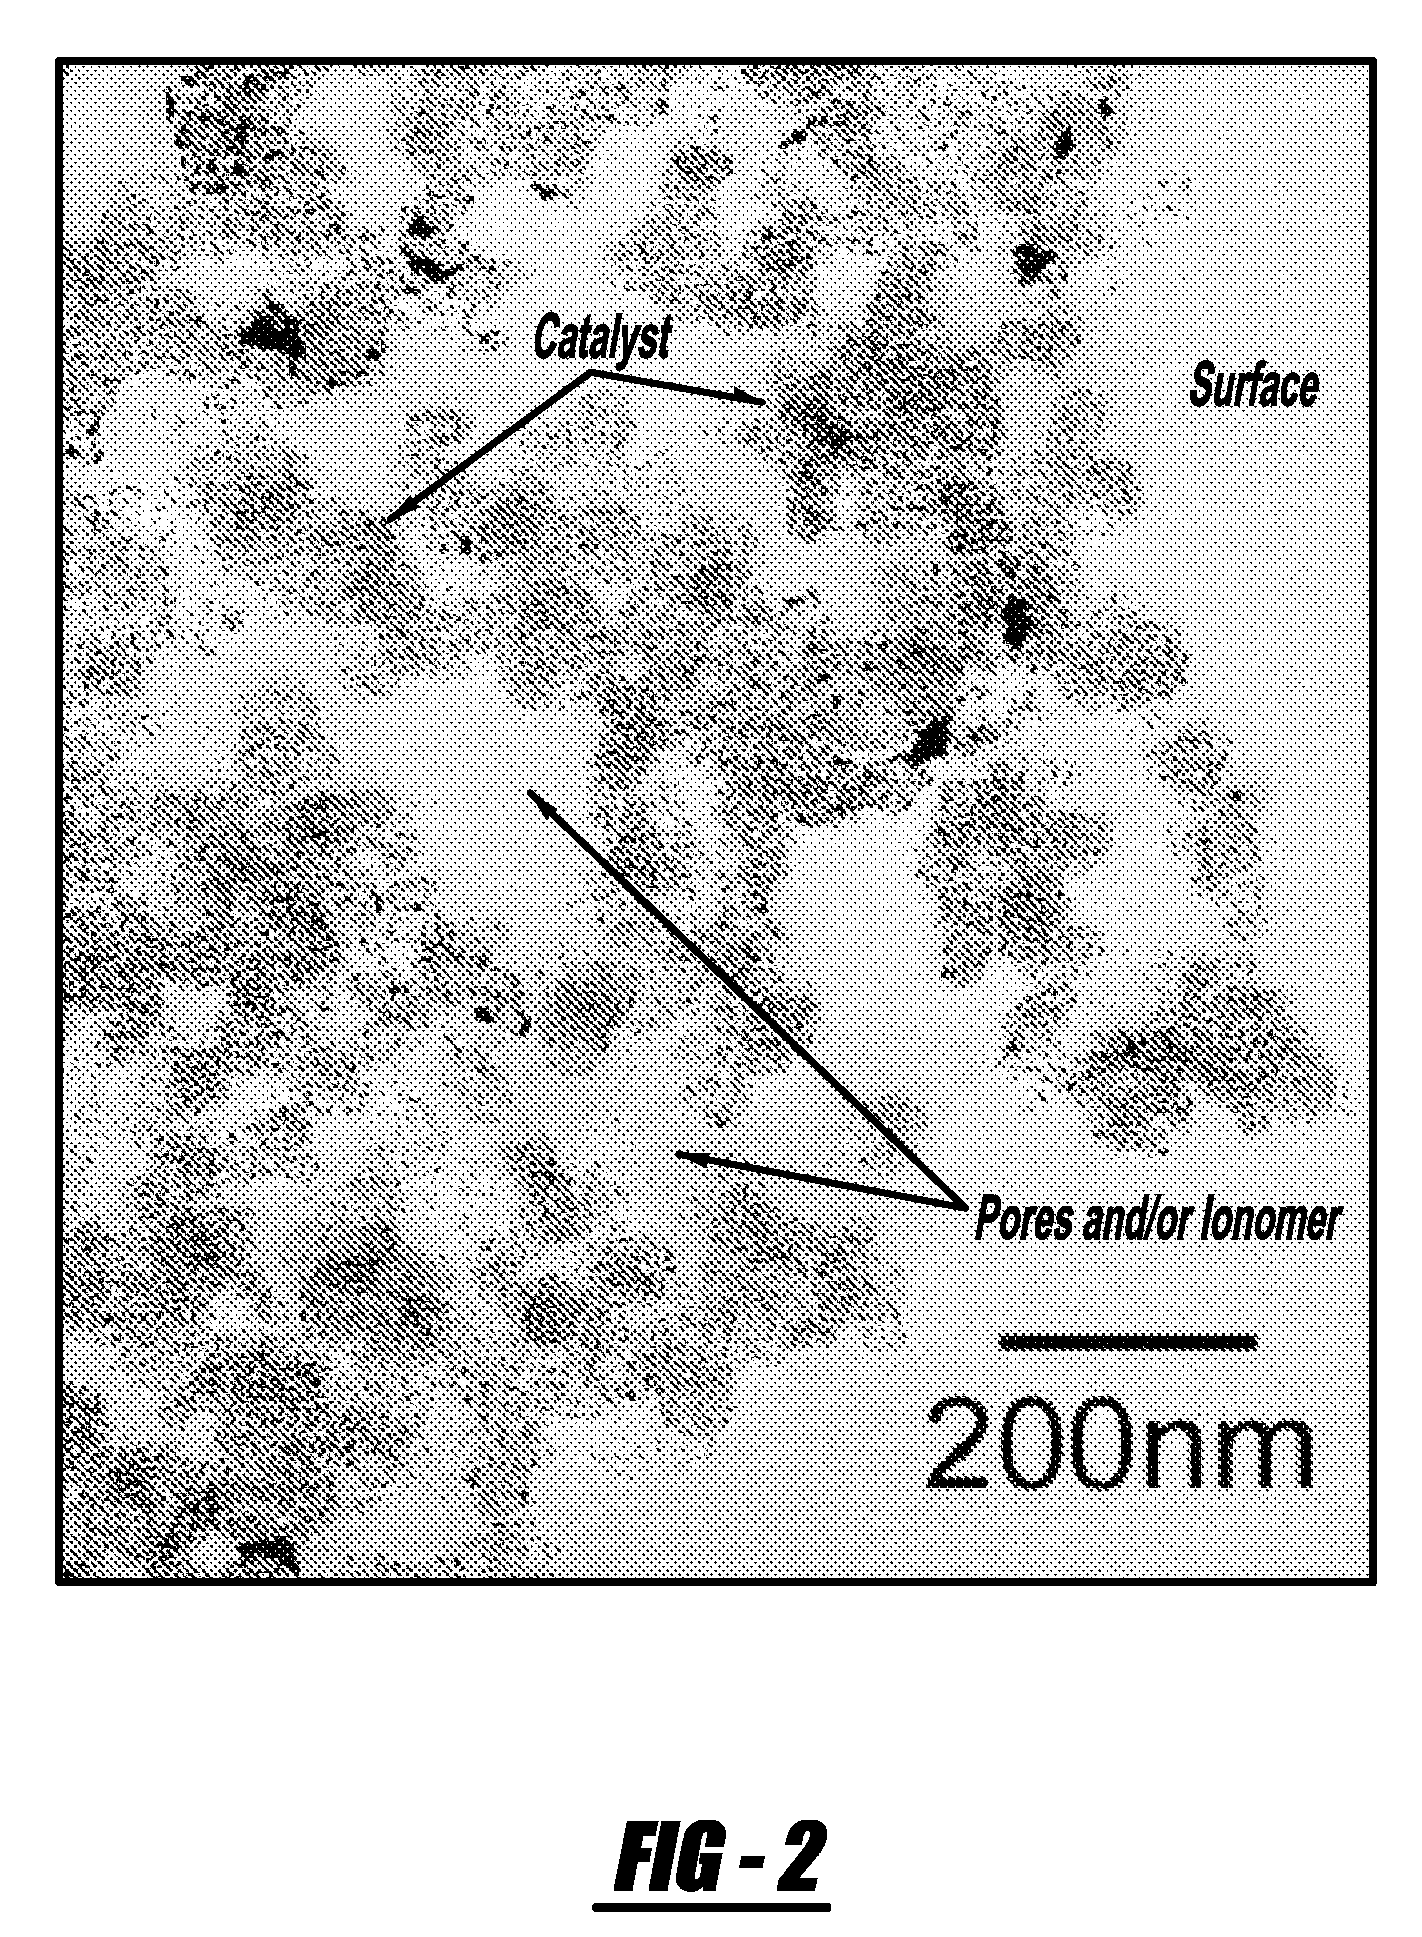 Method for Characterizing the Porosity in Fuel Cell Electrodes